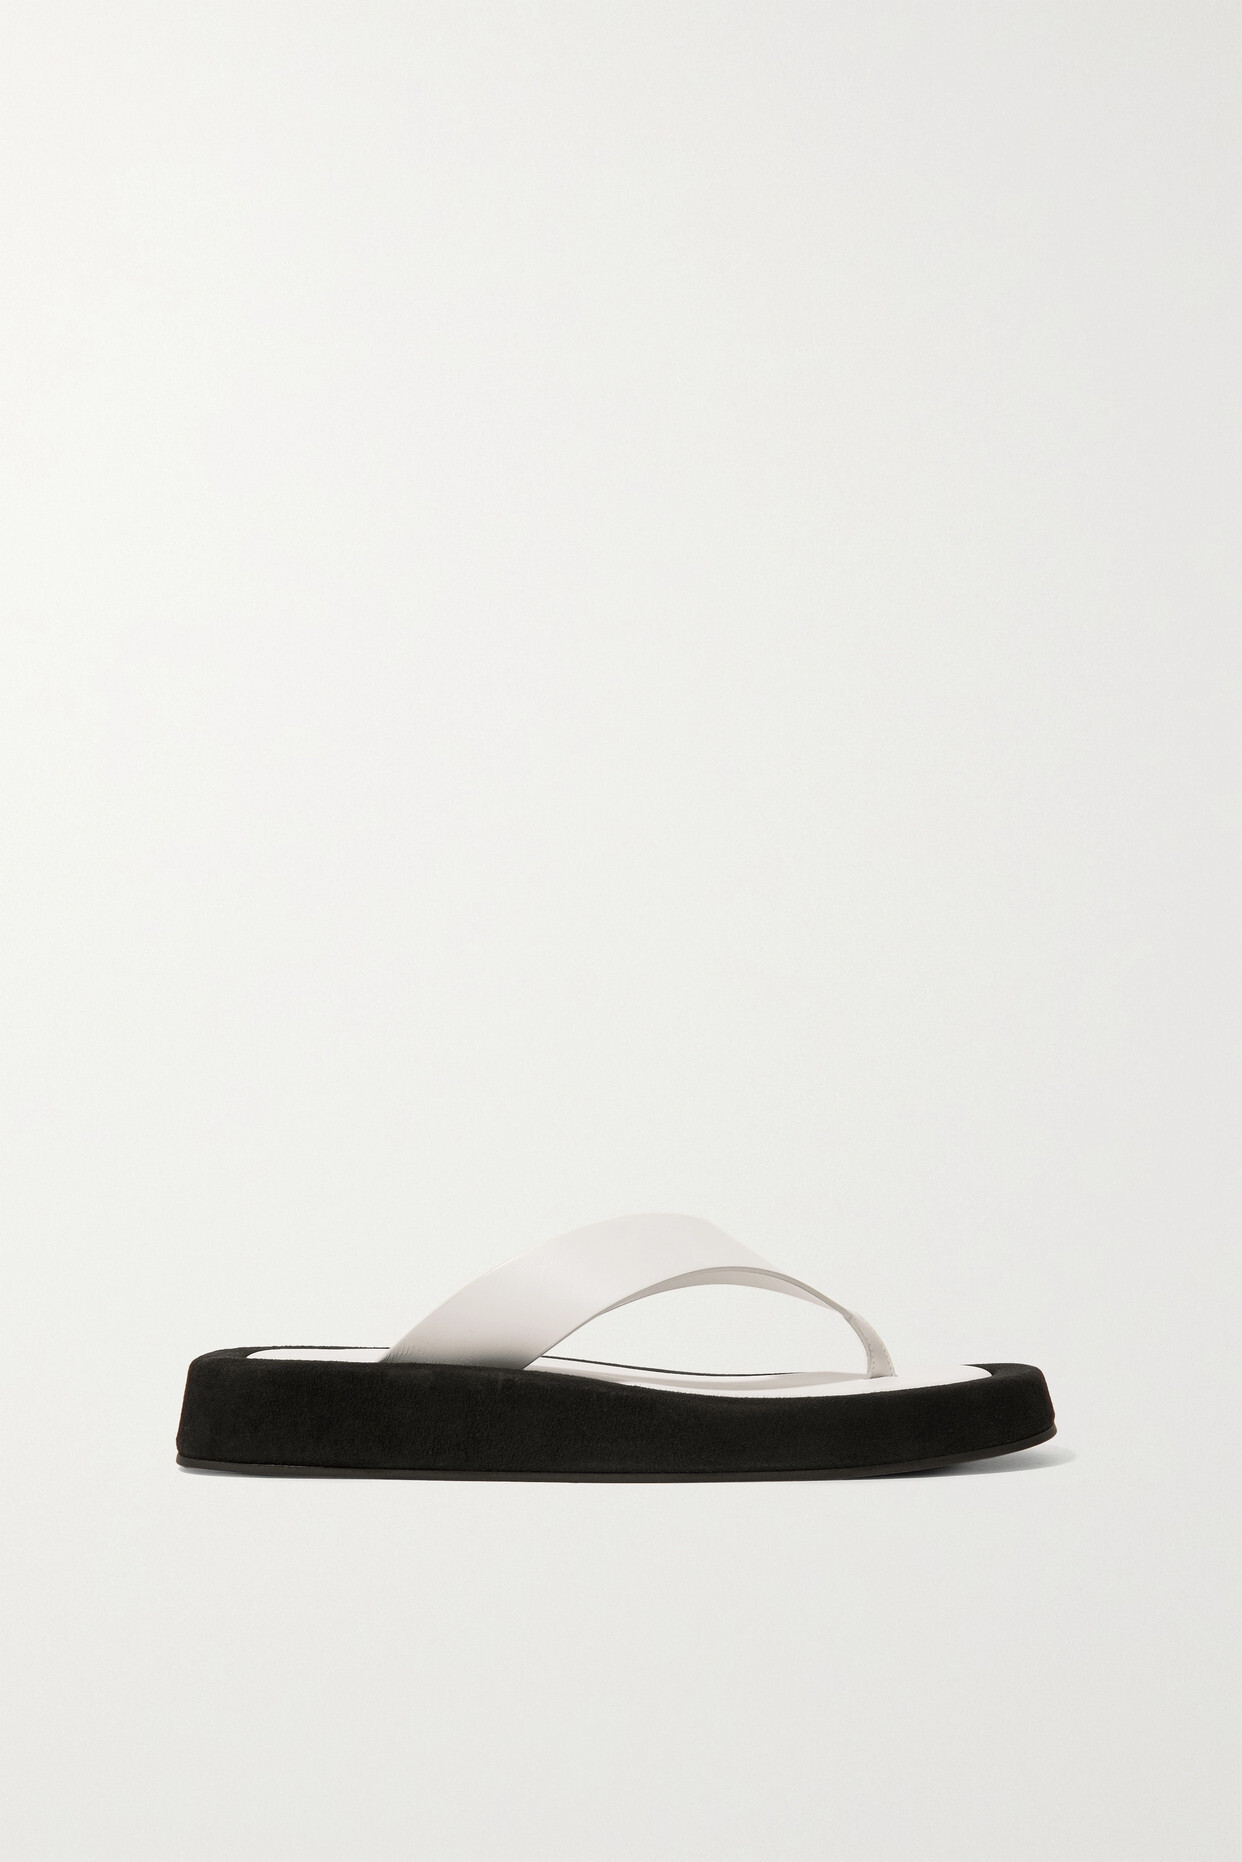 The Row - Ginza Two-tone Leather And Suede Platform Flip Flops - White